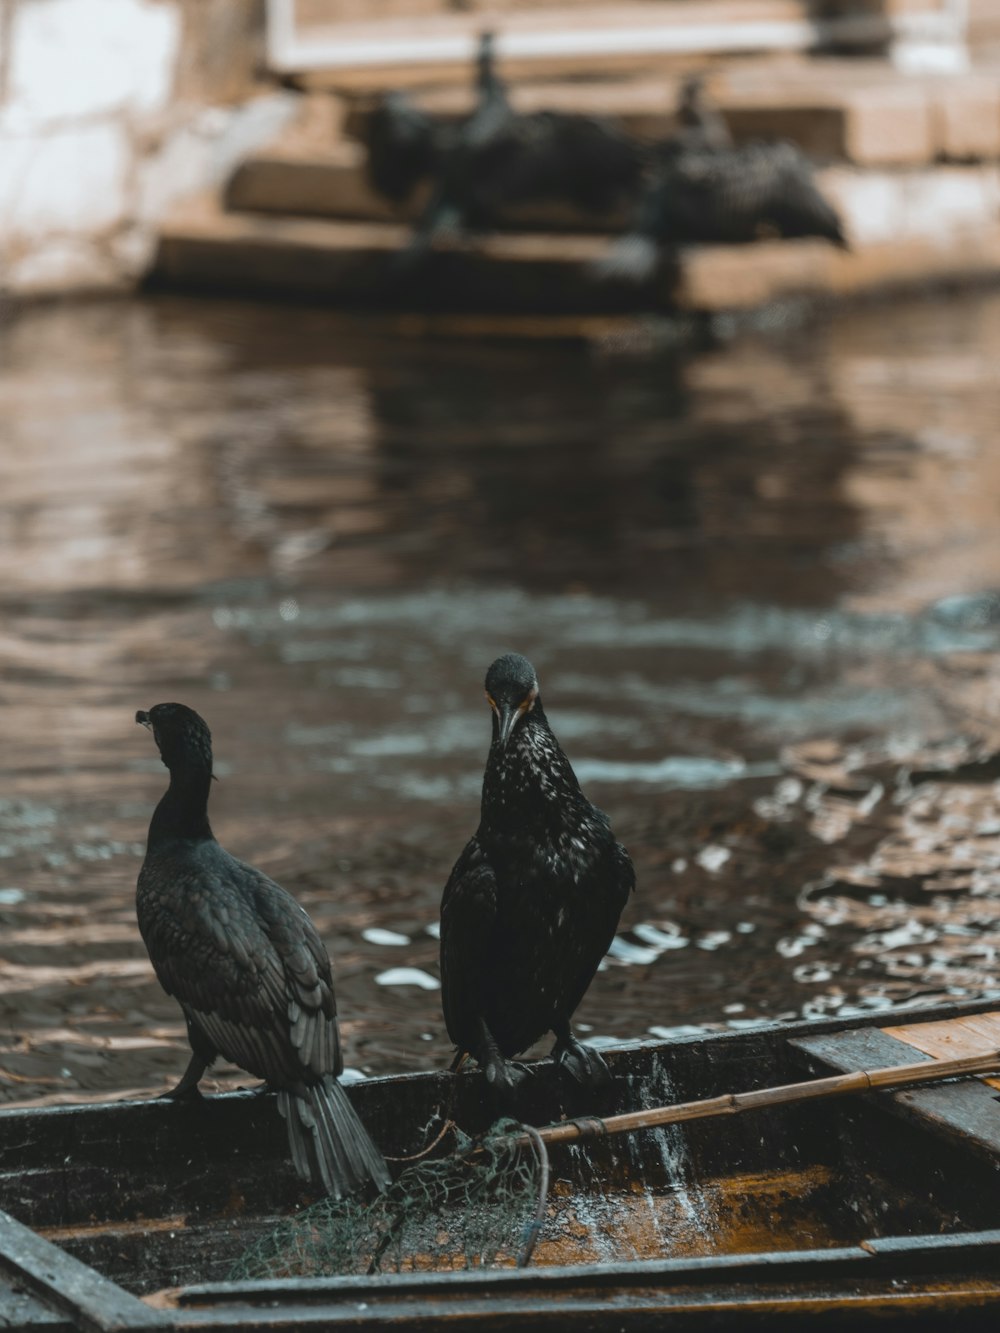 two black birds sitting on a boat in a body of water